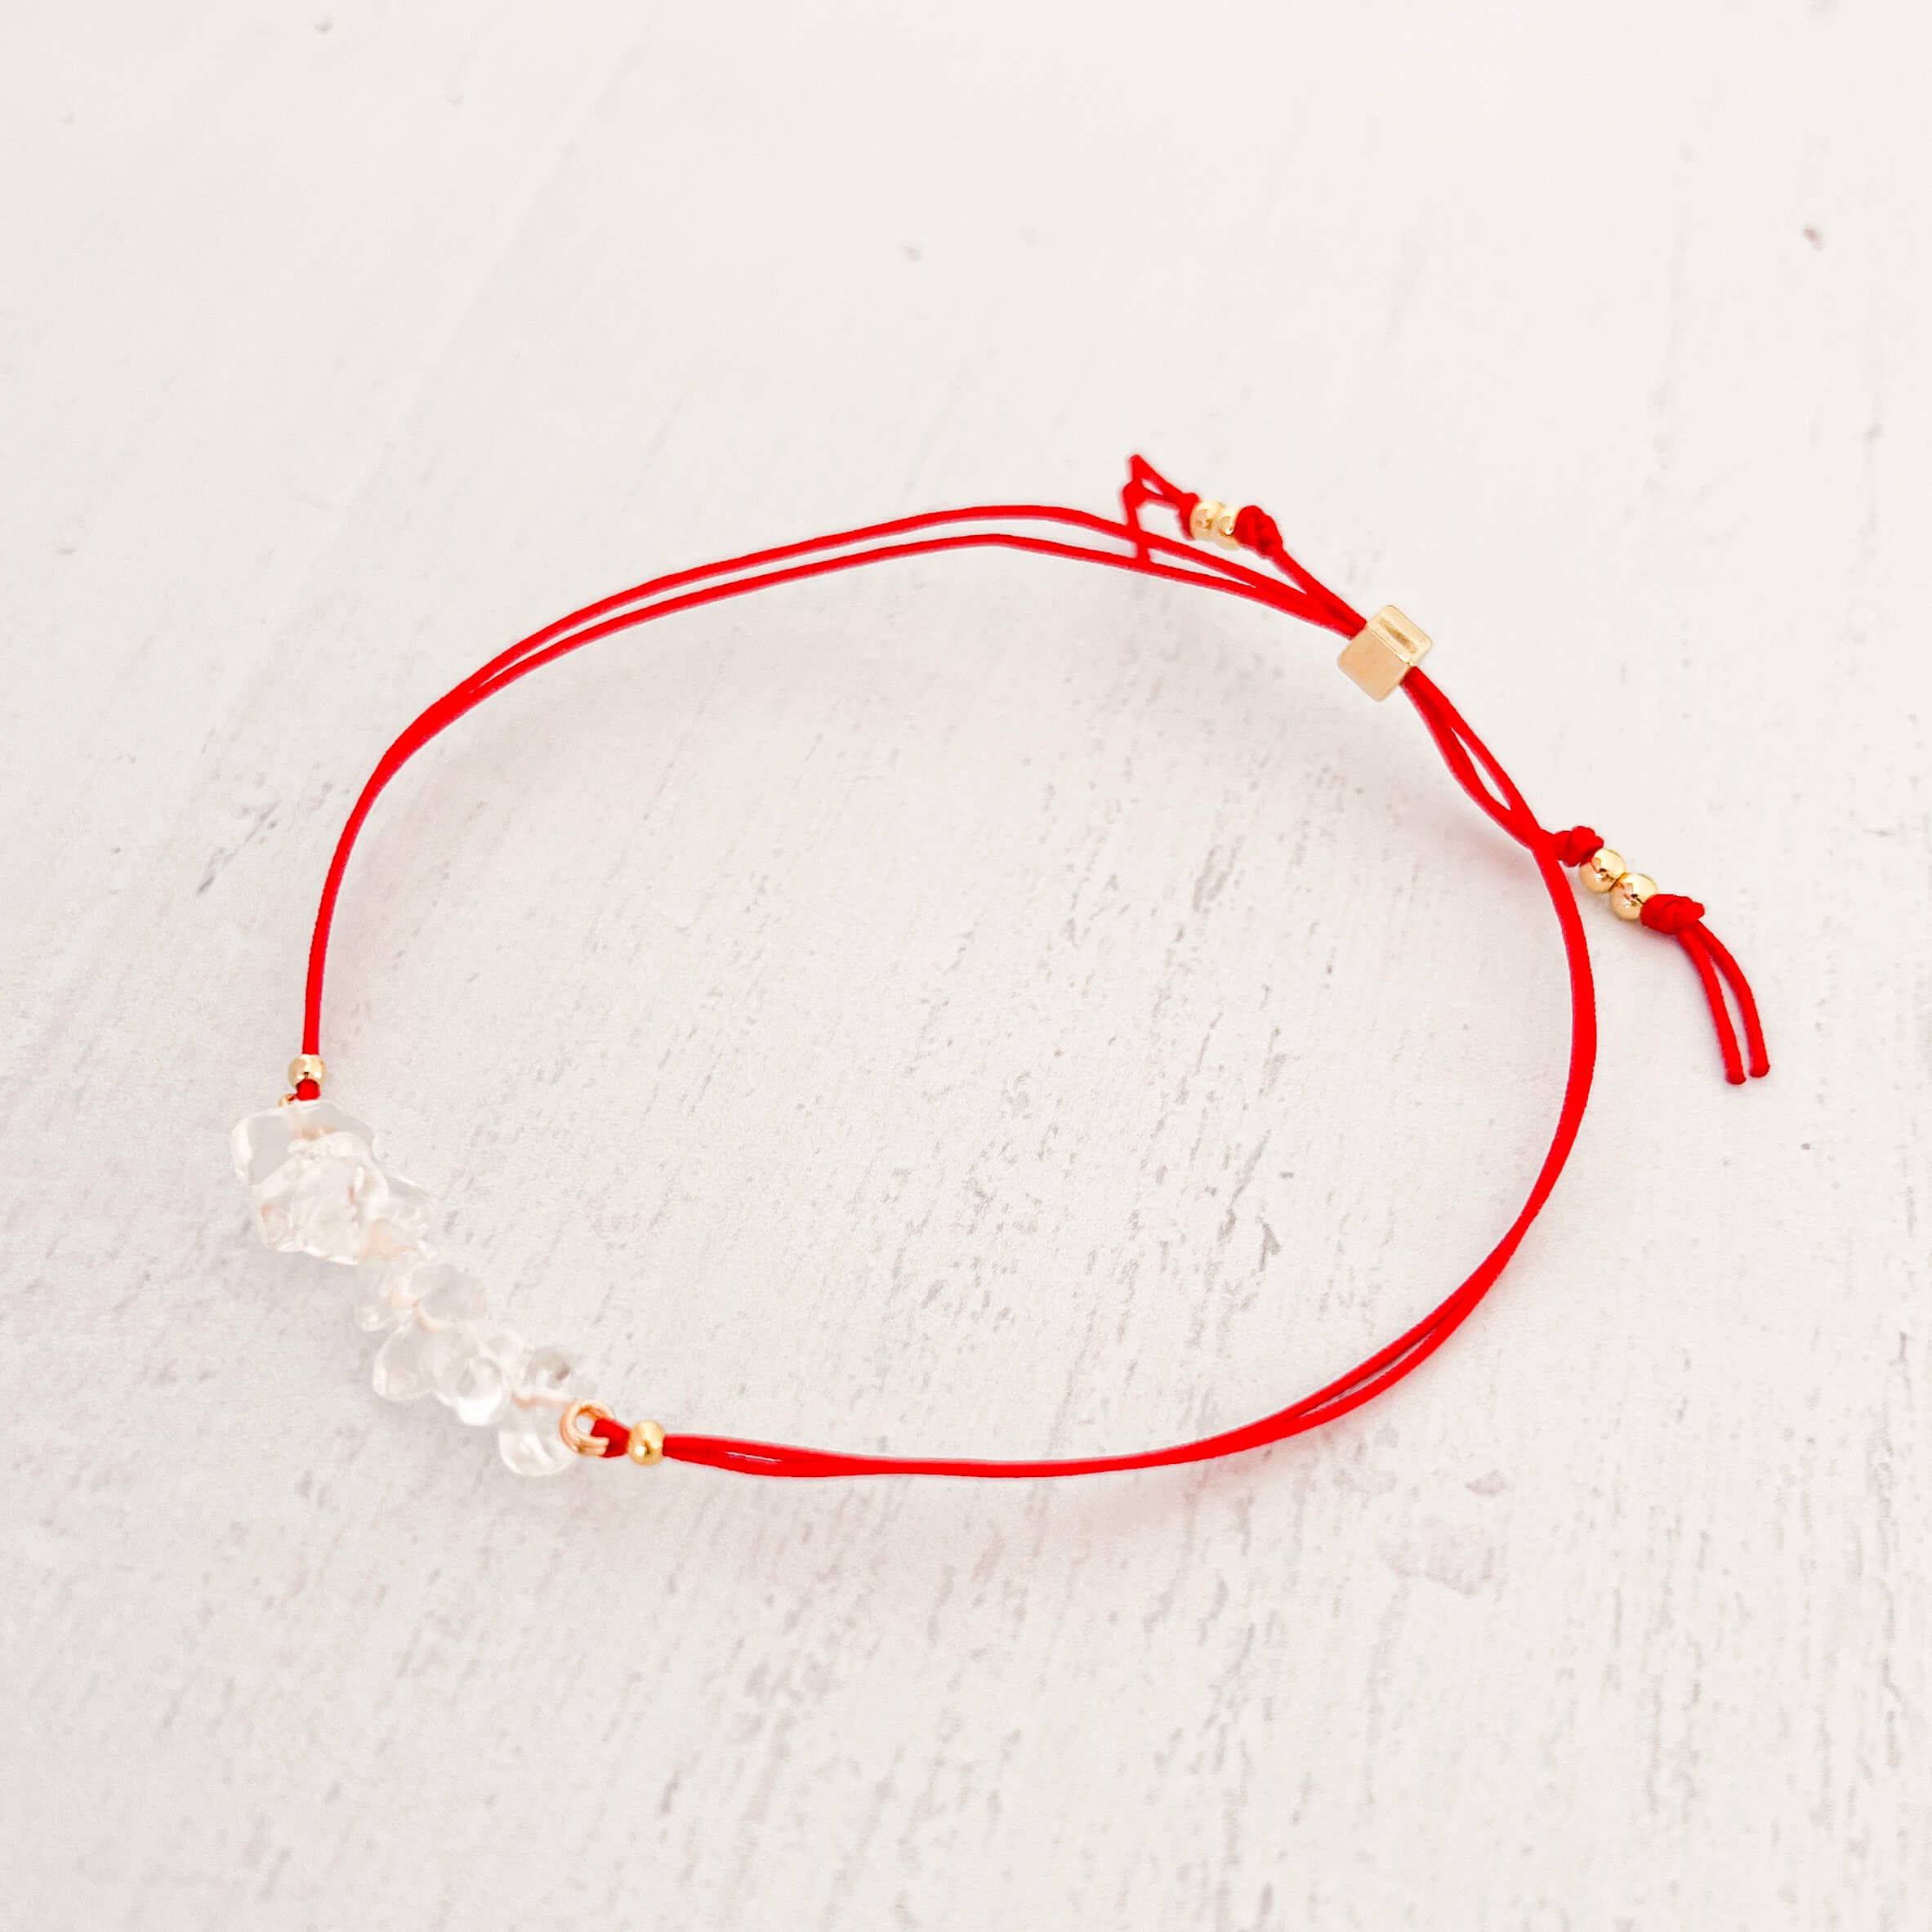 Quartz Crystal Natural Stone Bracelet with Red Yarn